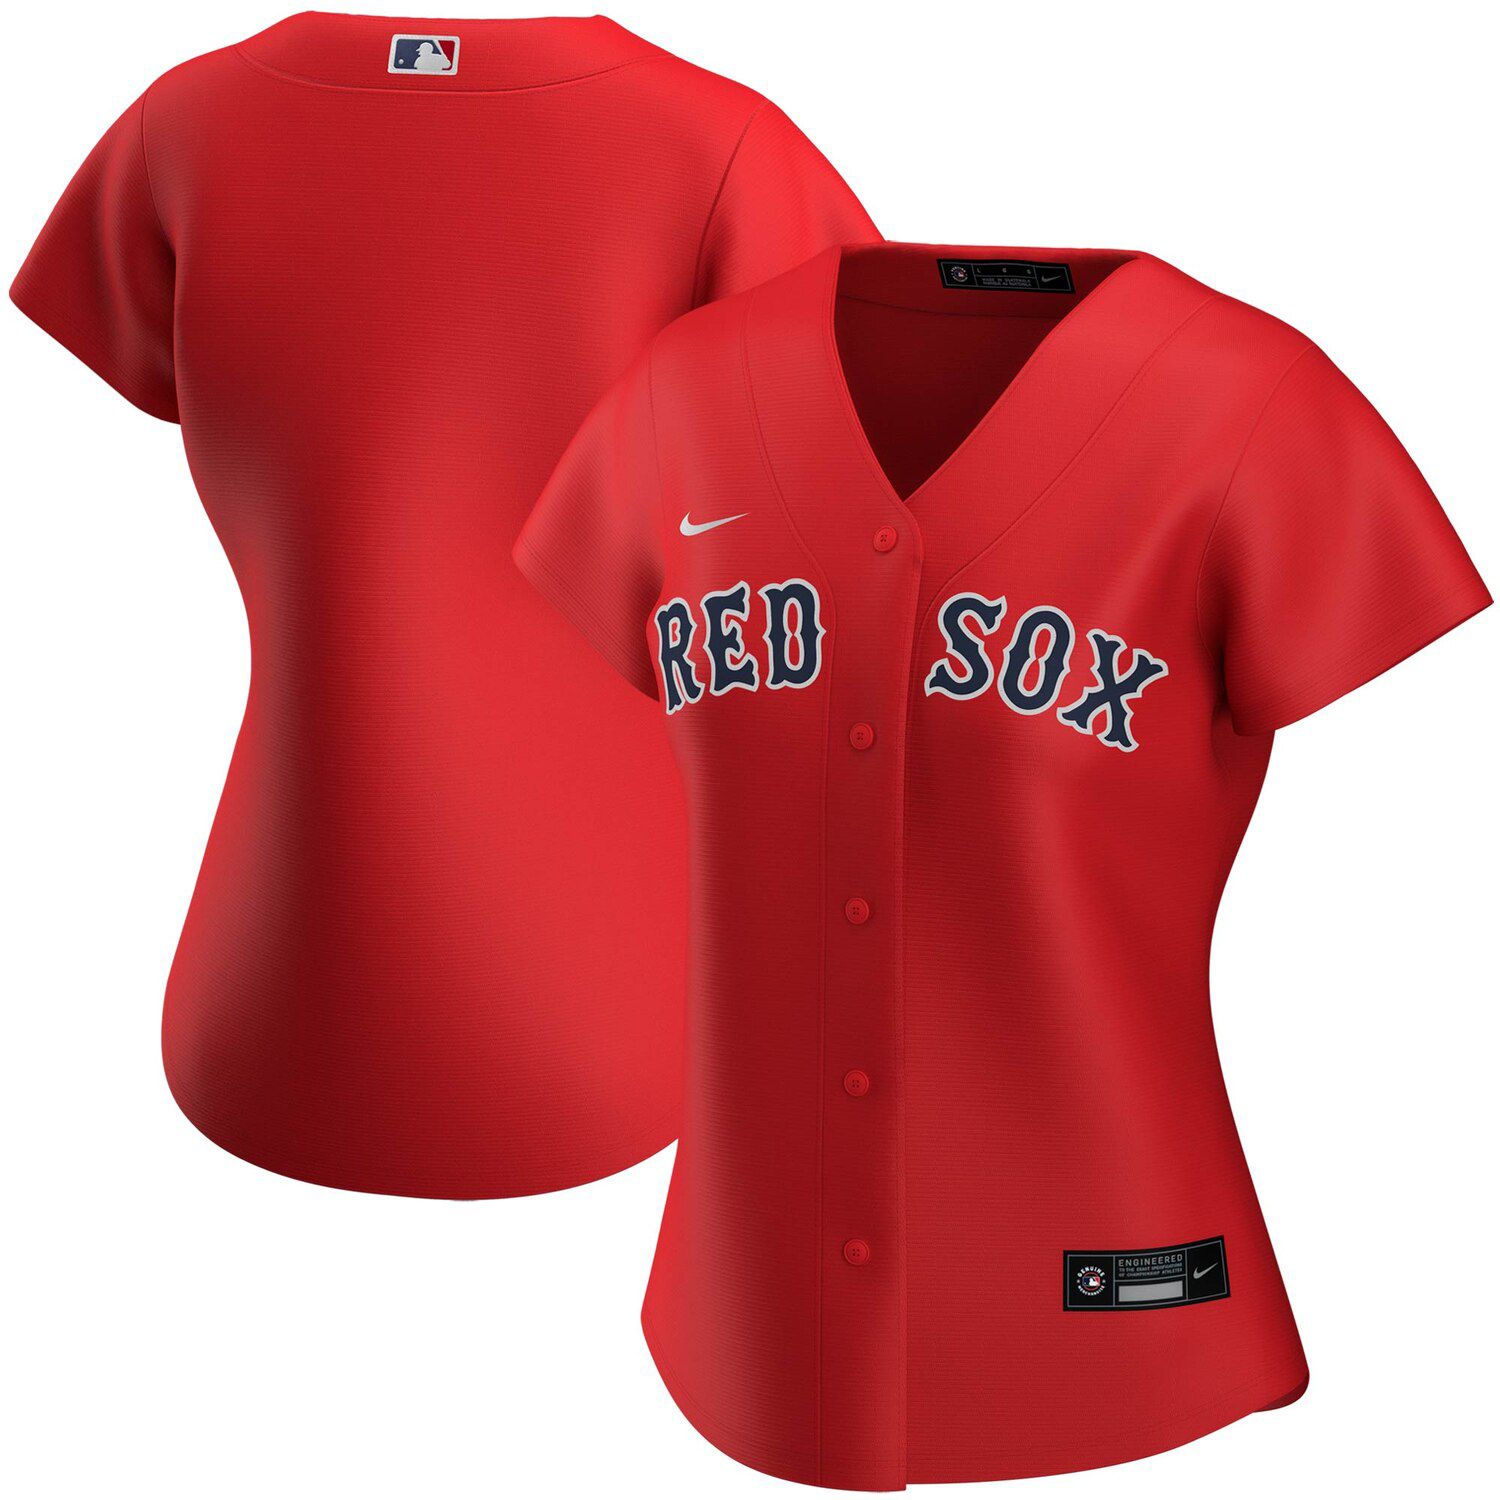 price red sox shirt